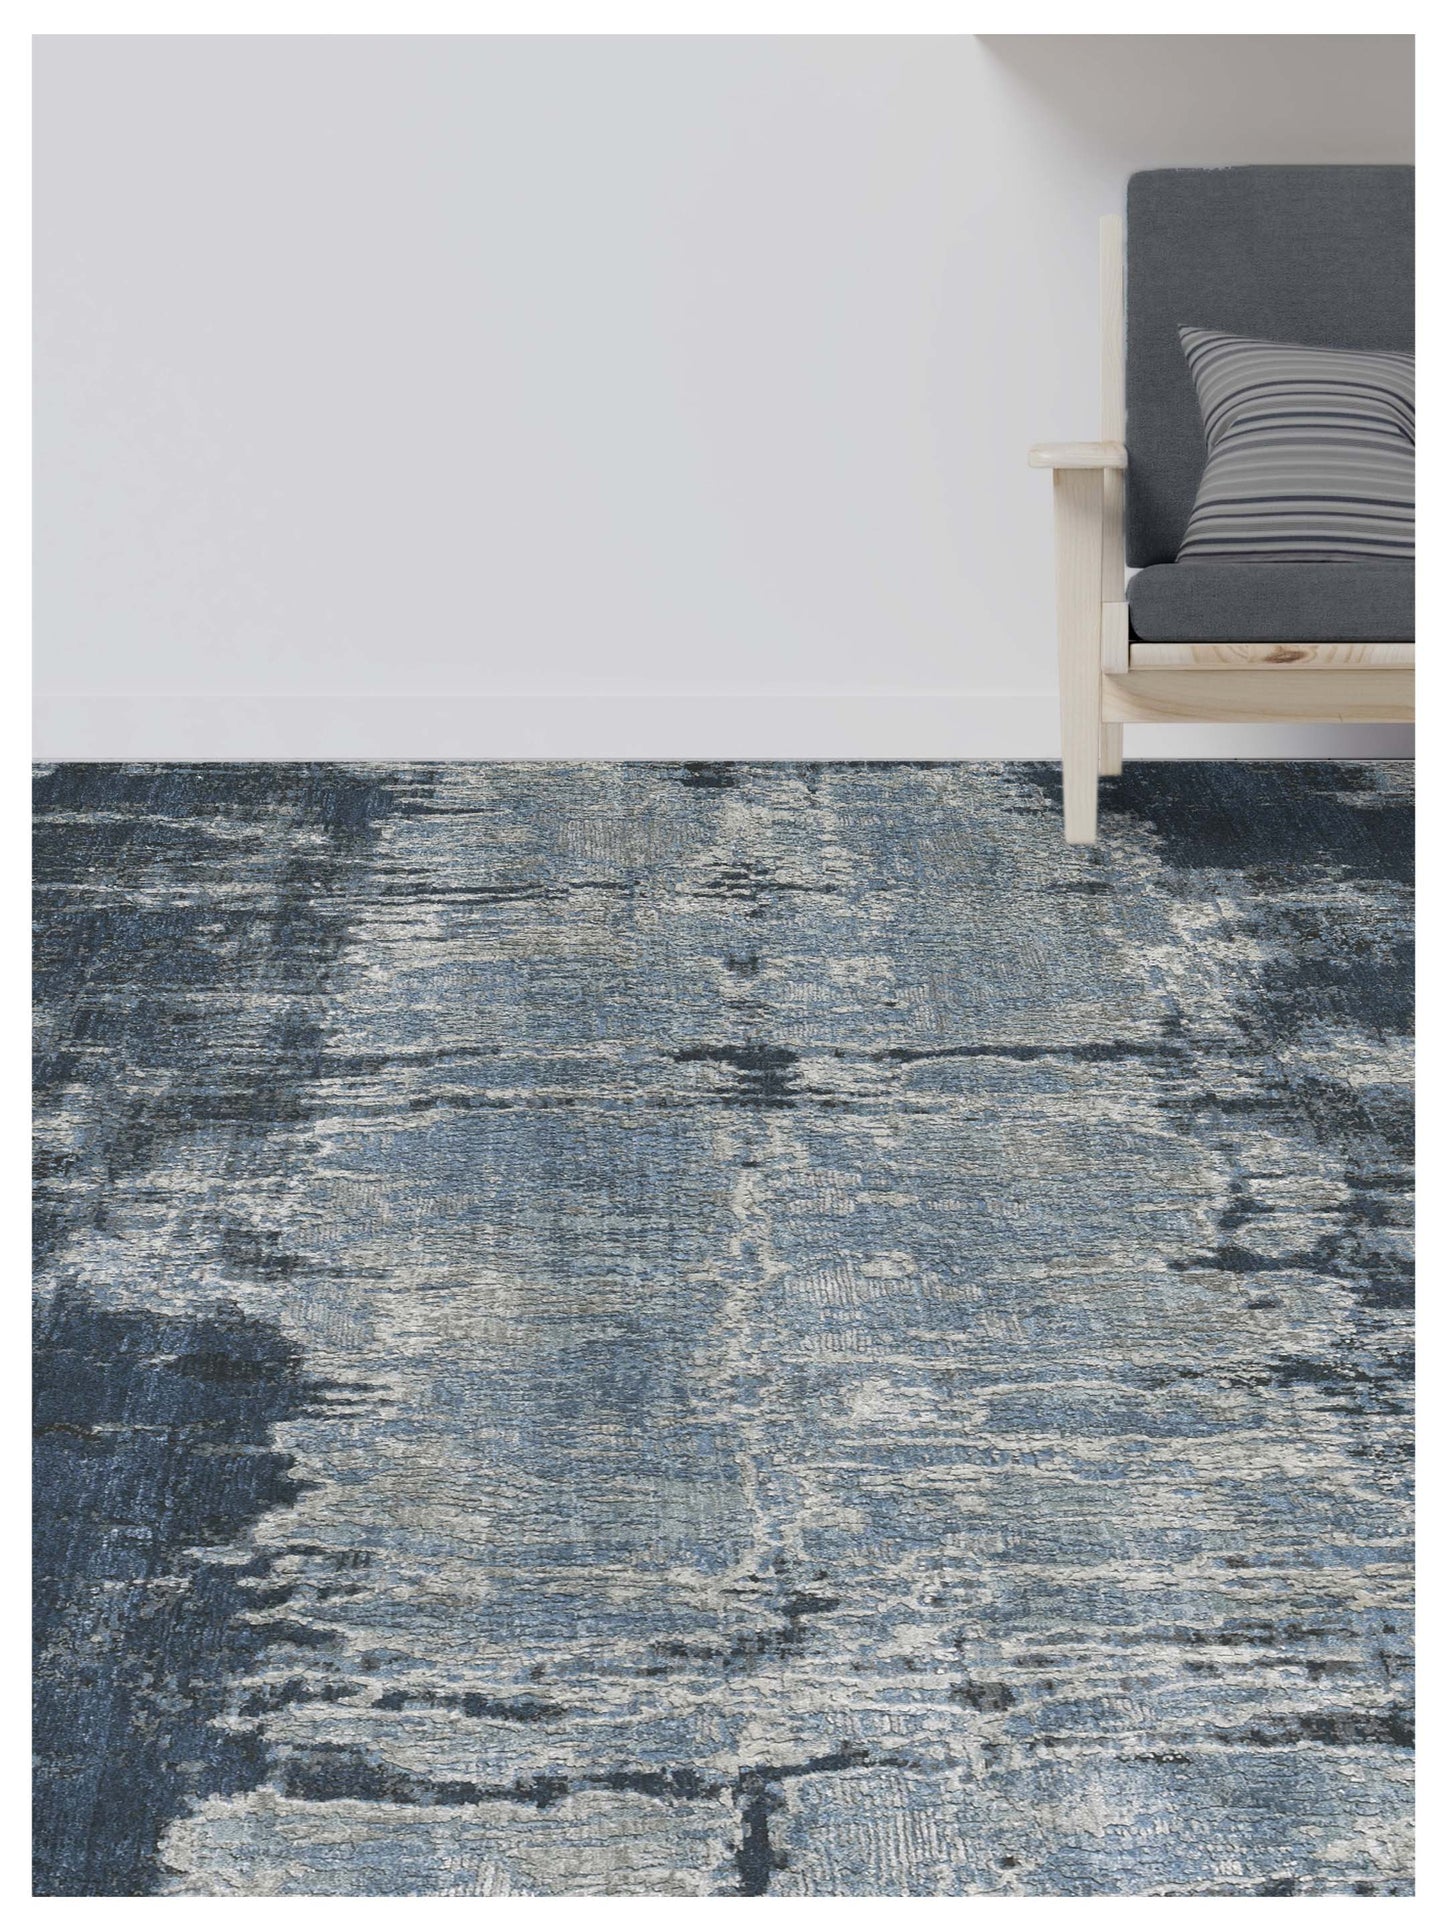 Limited Zelma WI-482 BLUE SAPPHIRE  Transitional Knotted Rug